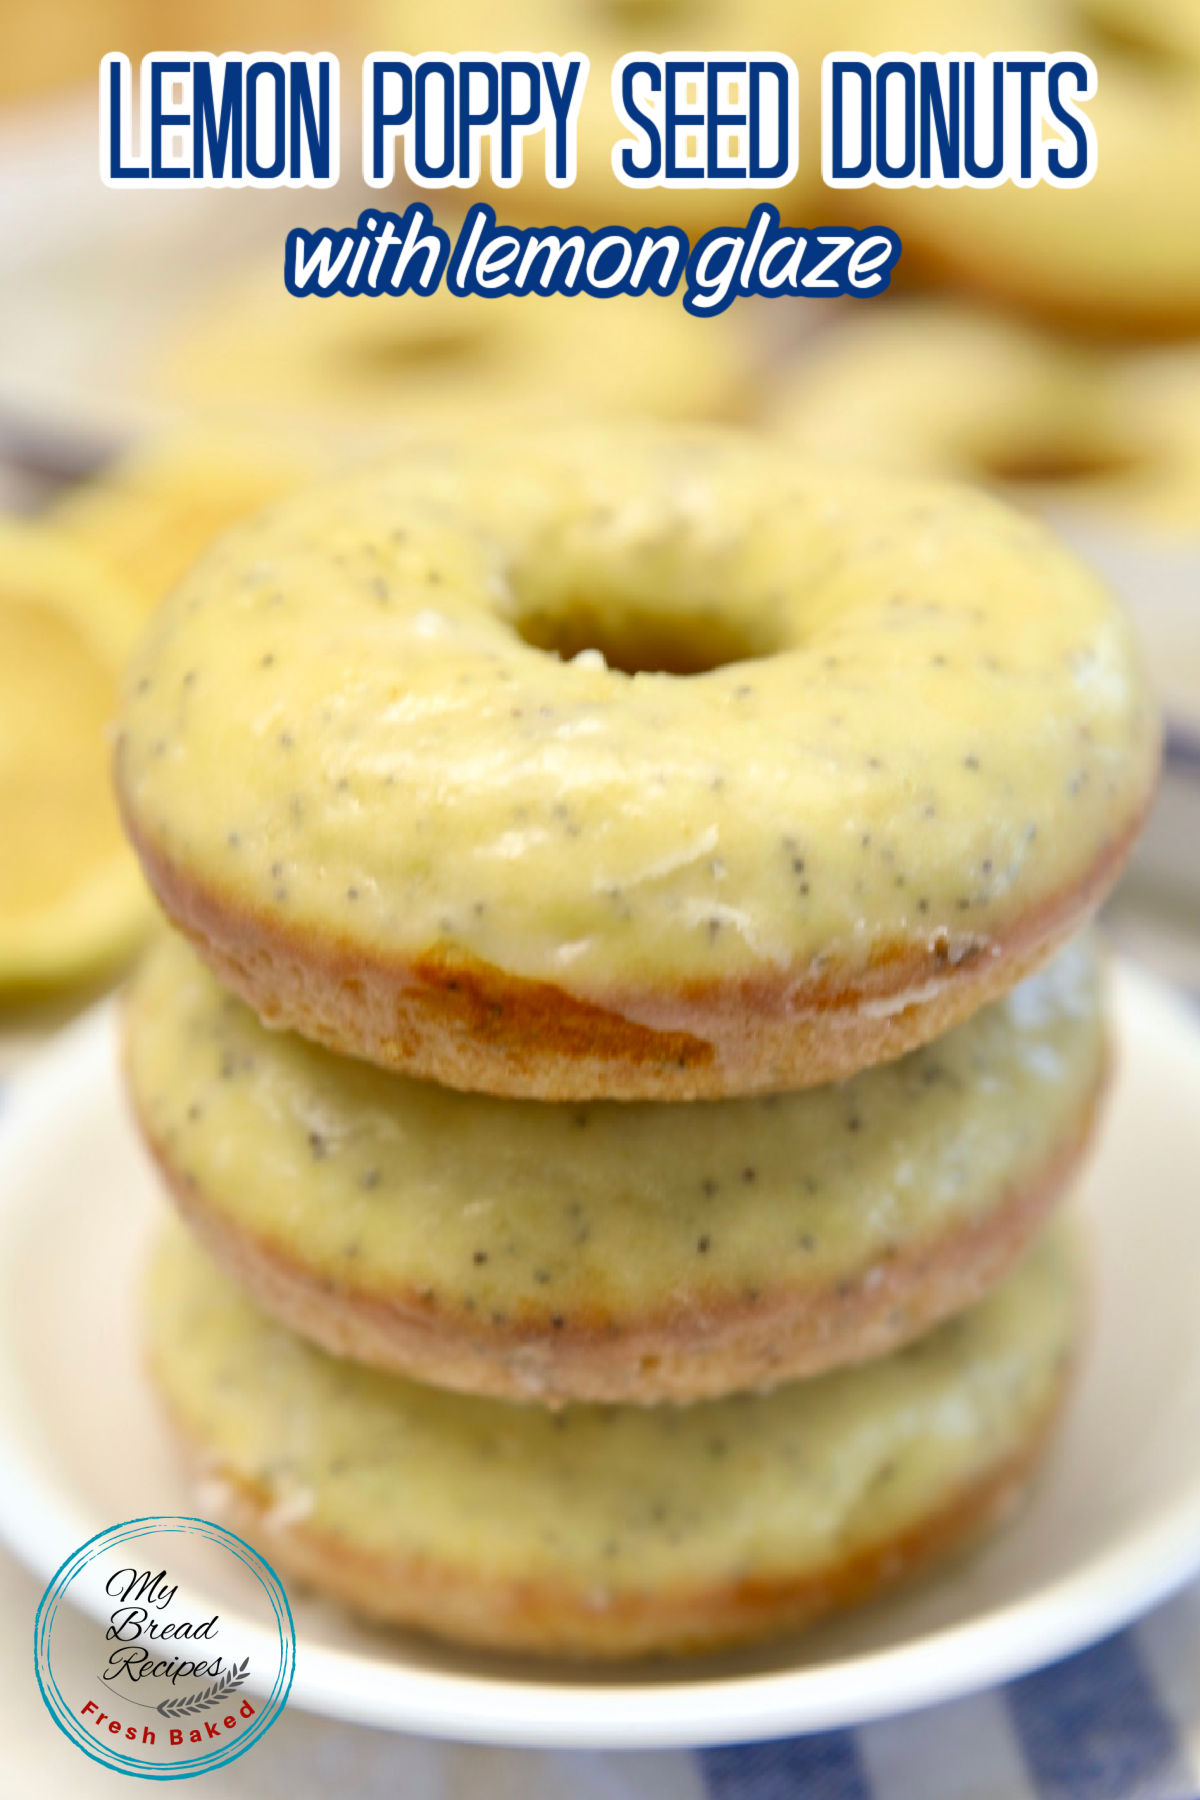 Stack of lemon poppy seed donuts with text overlay.